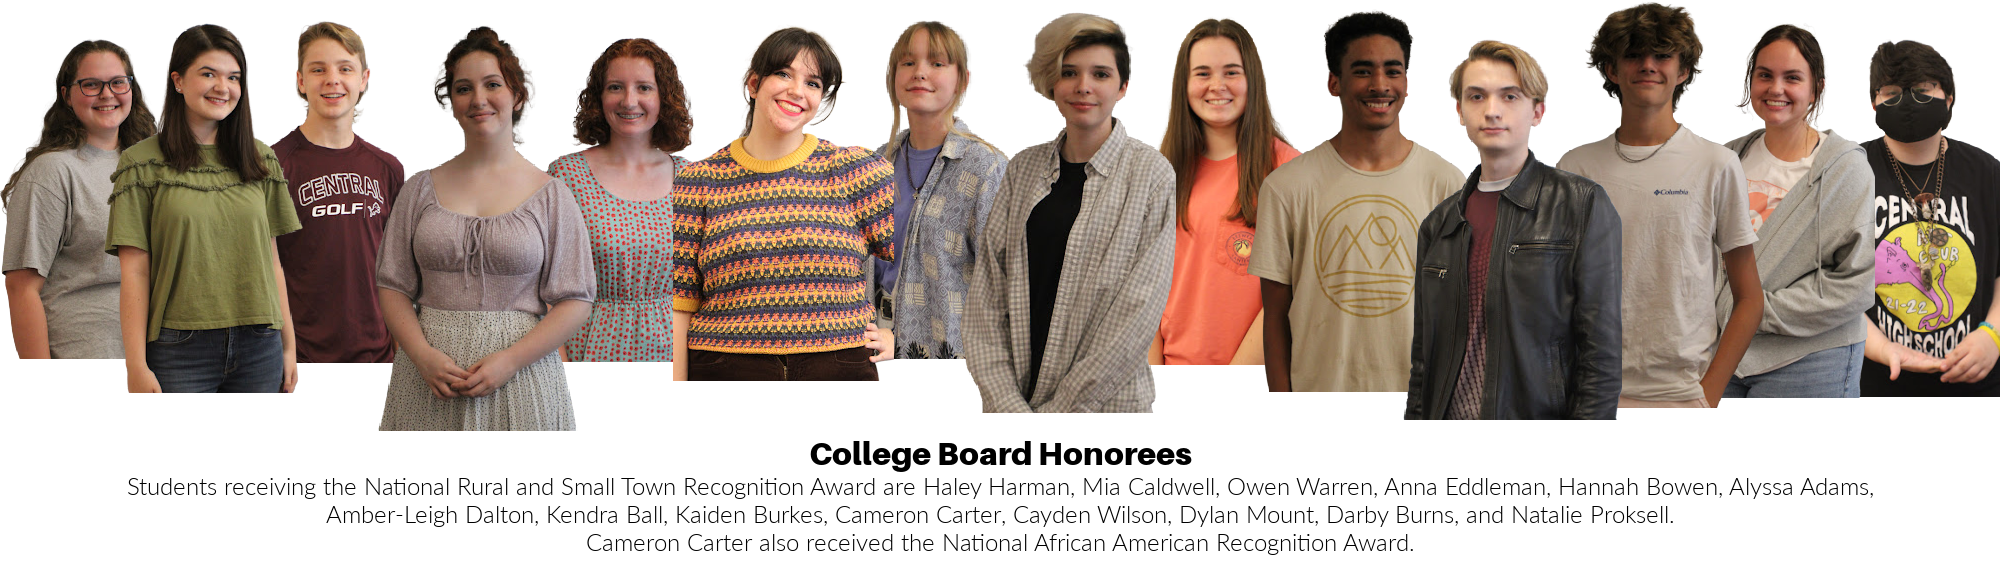 College Board Honorees